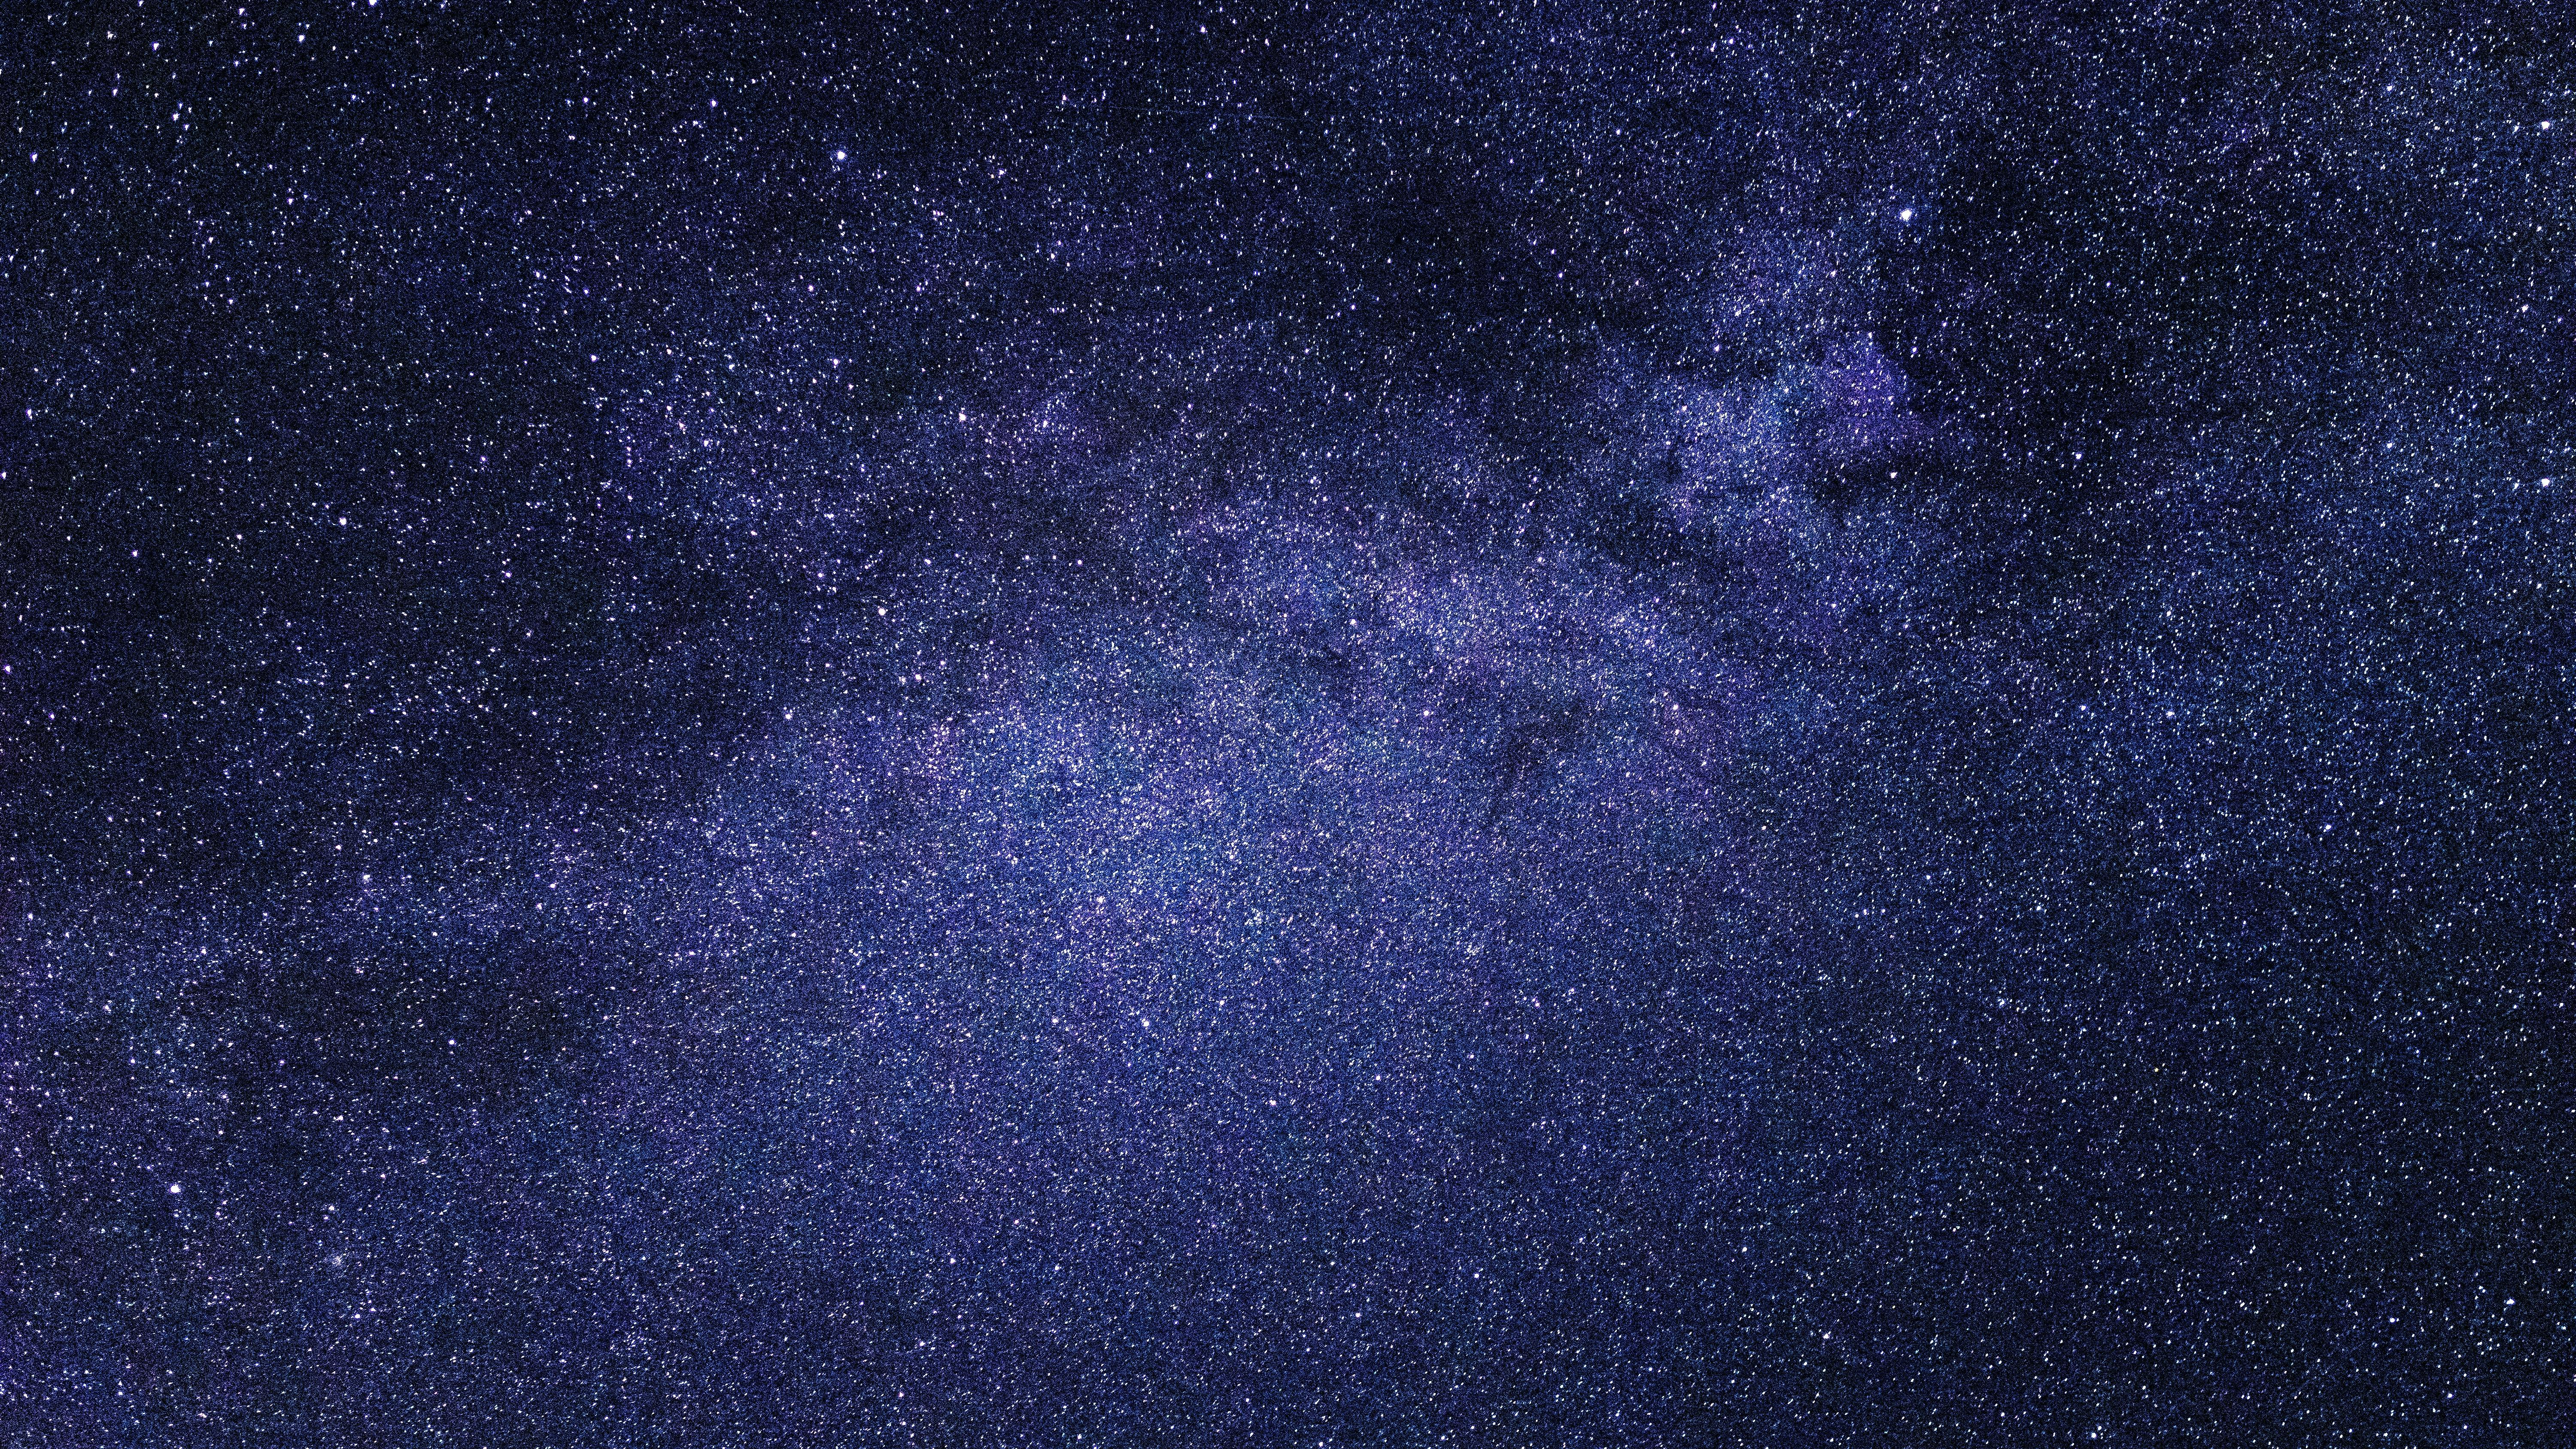 Starry Night Photos, Download The BEST Free Starry Night Stock